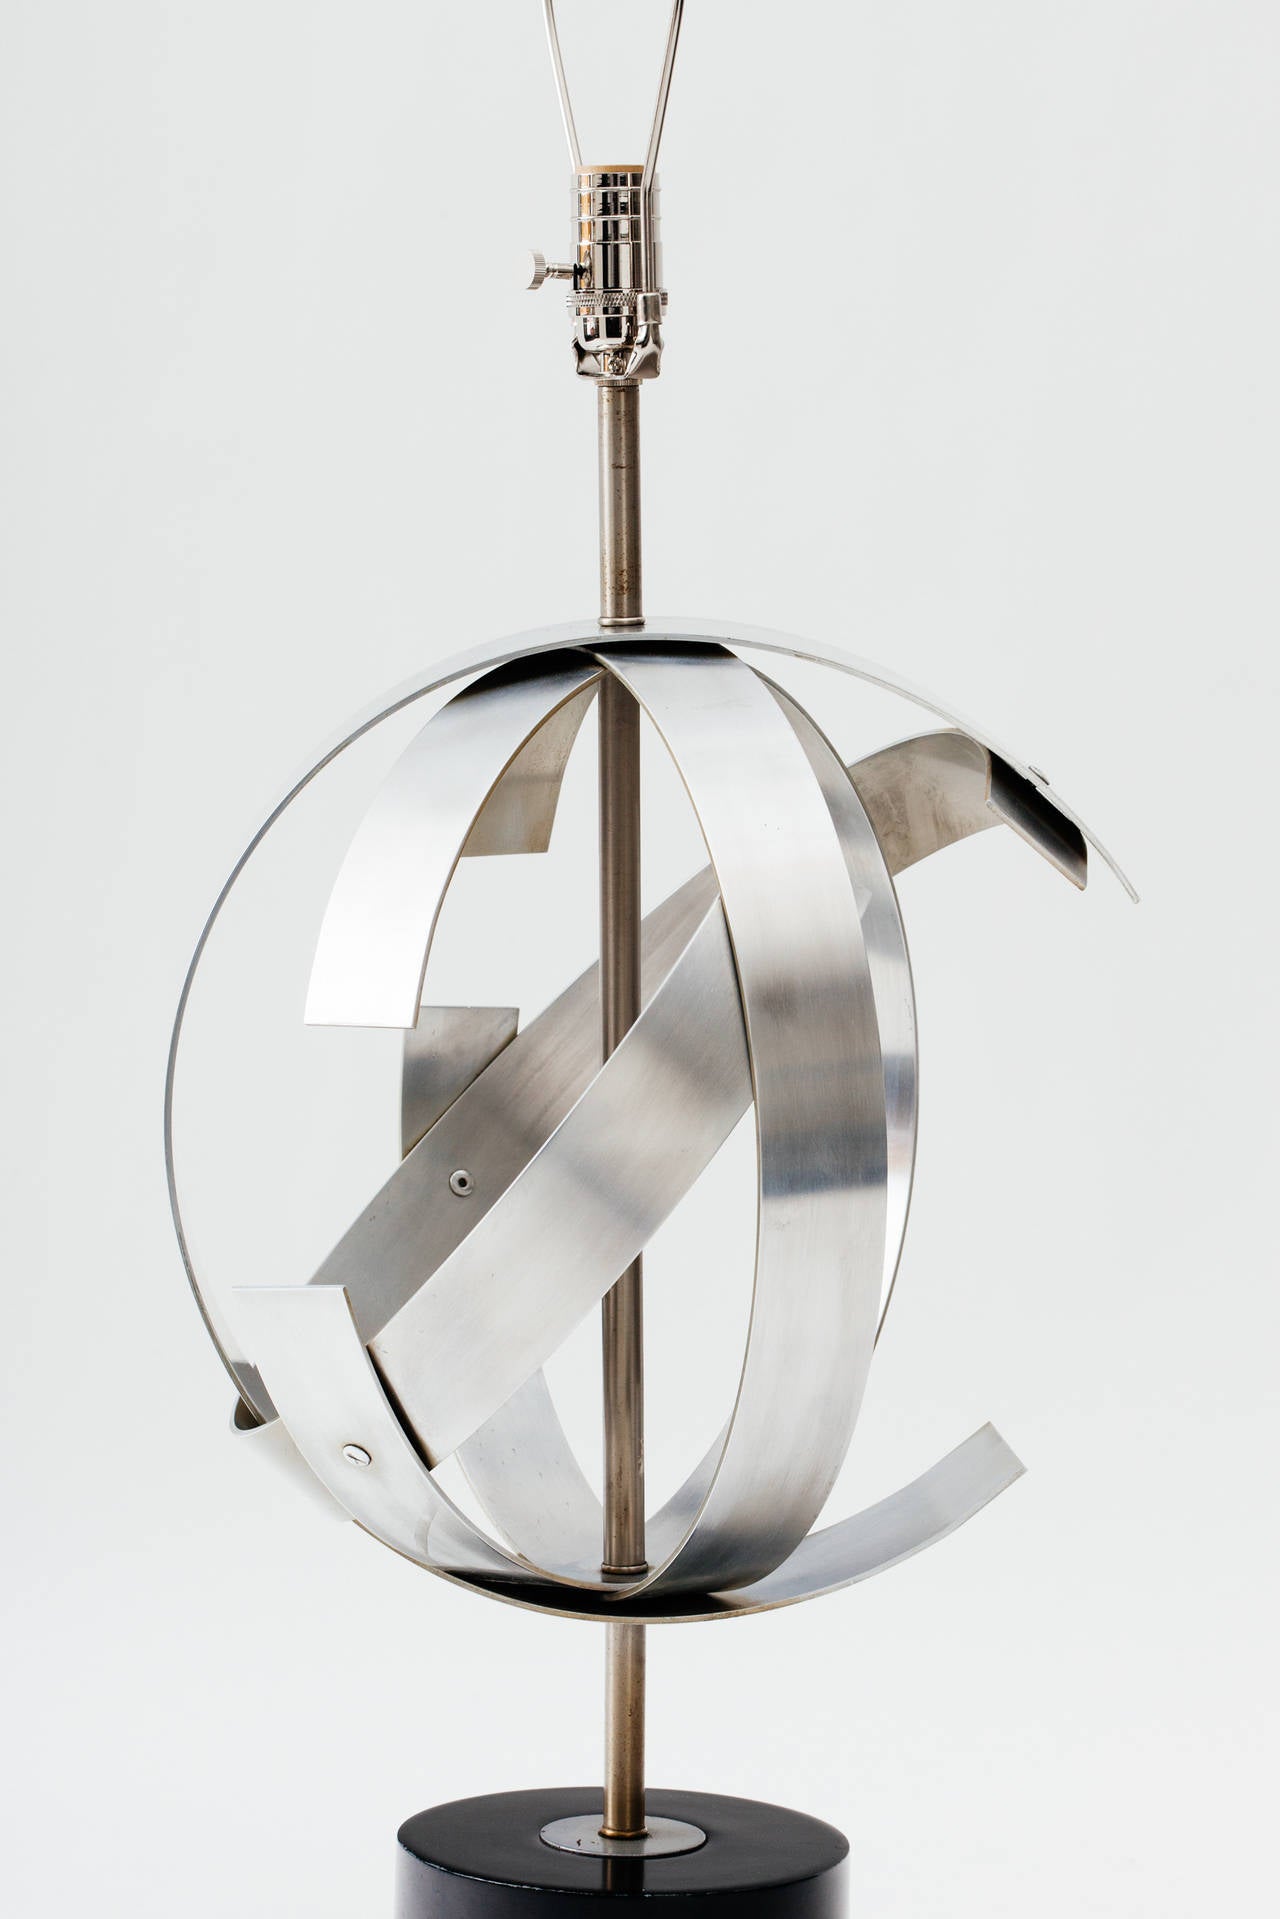 American Abstract Aluminum Sphere Lamp by Laurel Lighting Company, circa 1970